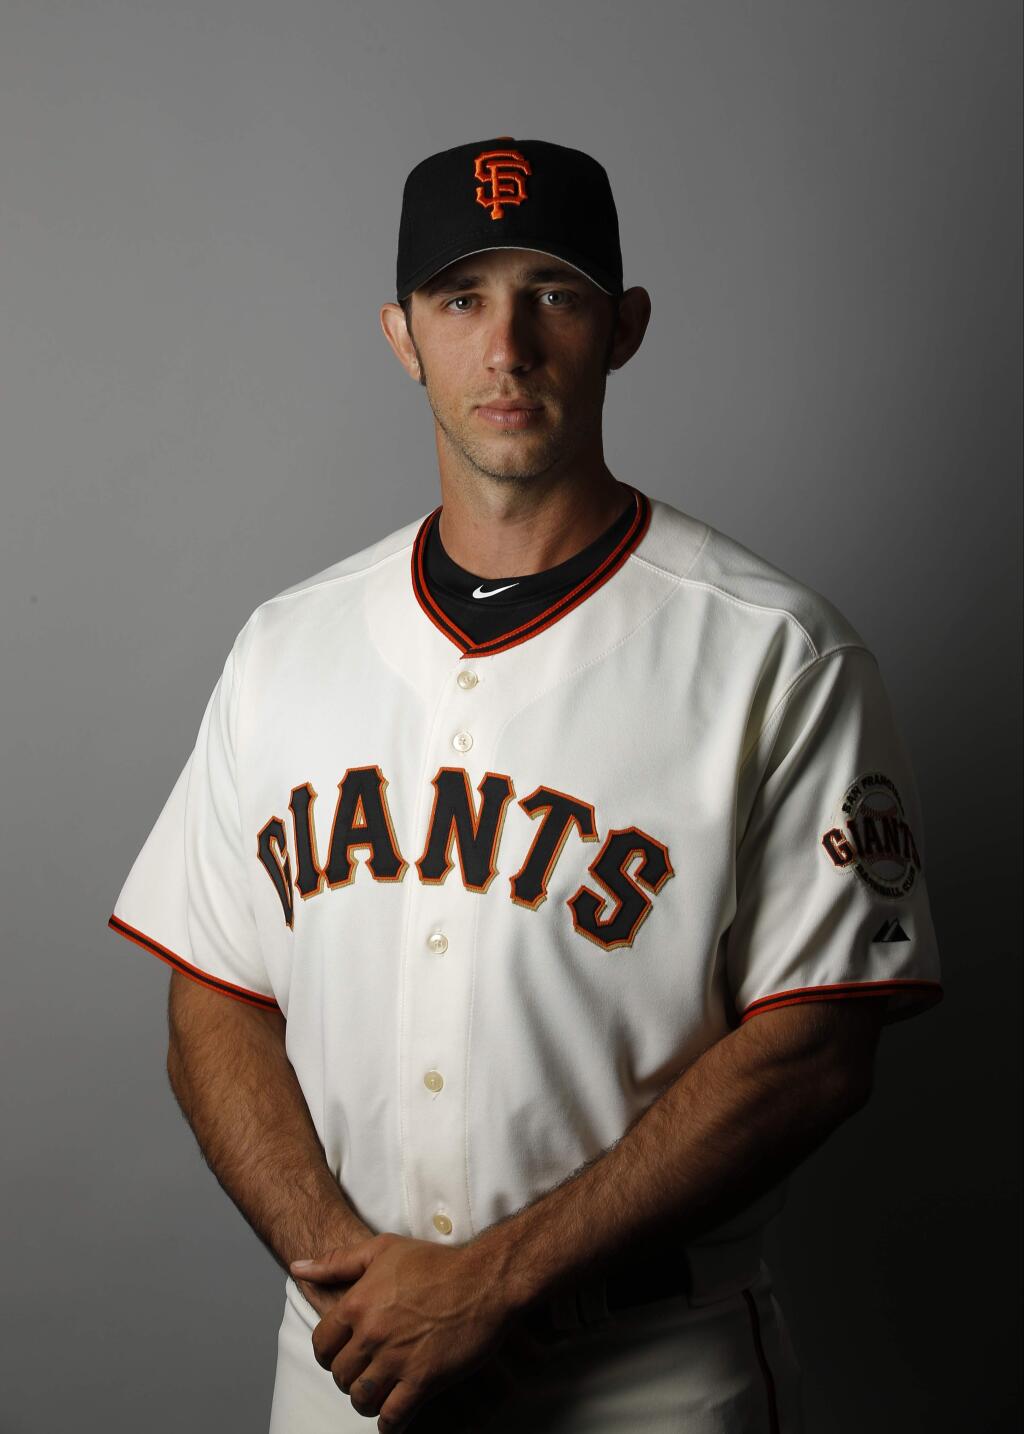 This is a 2016 photo of Madison Bumgarner of the San Francisco Giants baseball team. This image reflects the 2016 active roster as of Sunday, Feb. 28, 2016 when this image was taken. (AP Photo/Morry Gash)